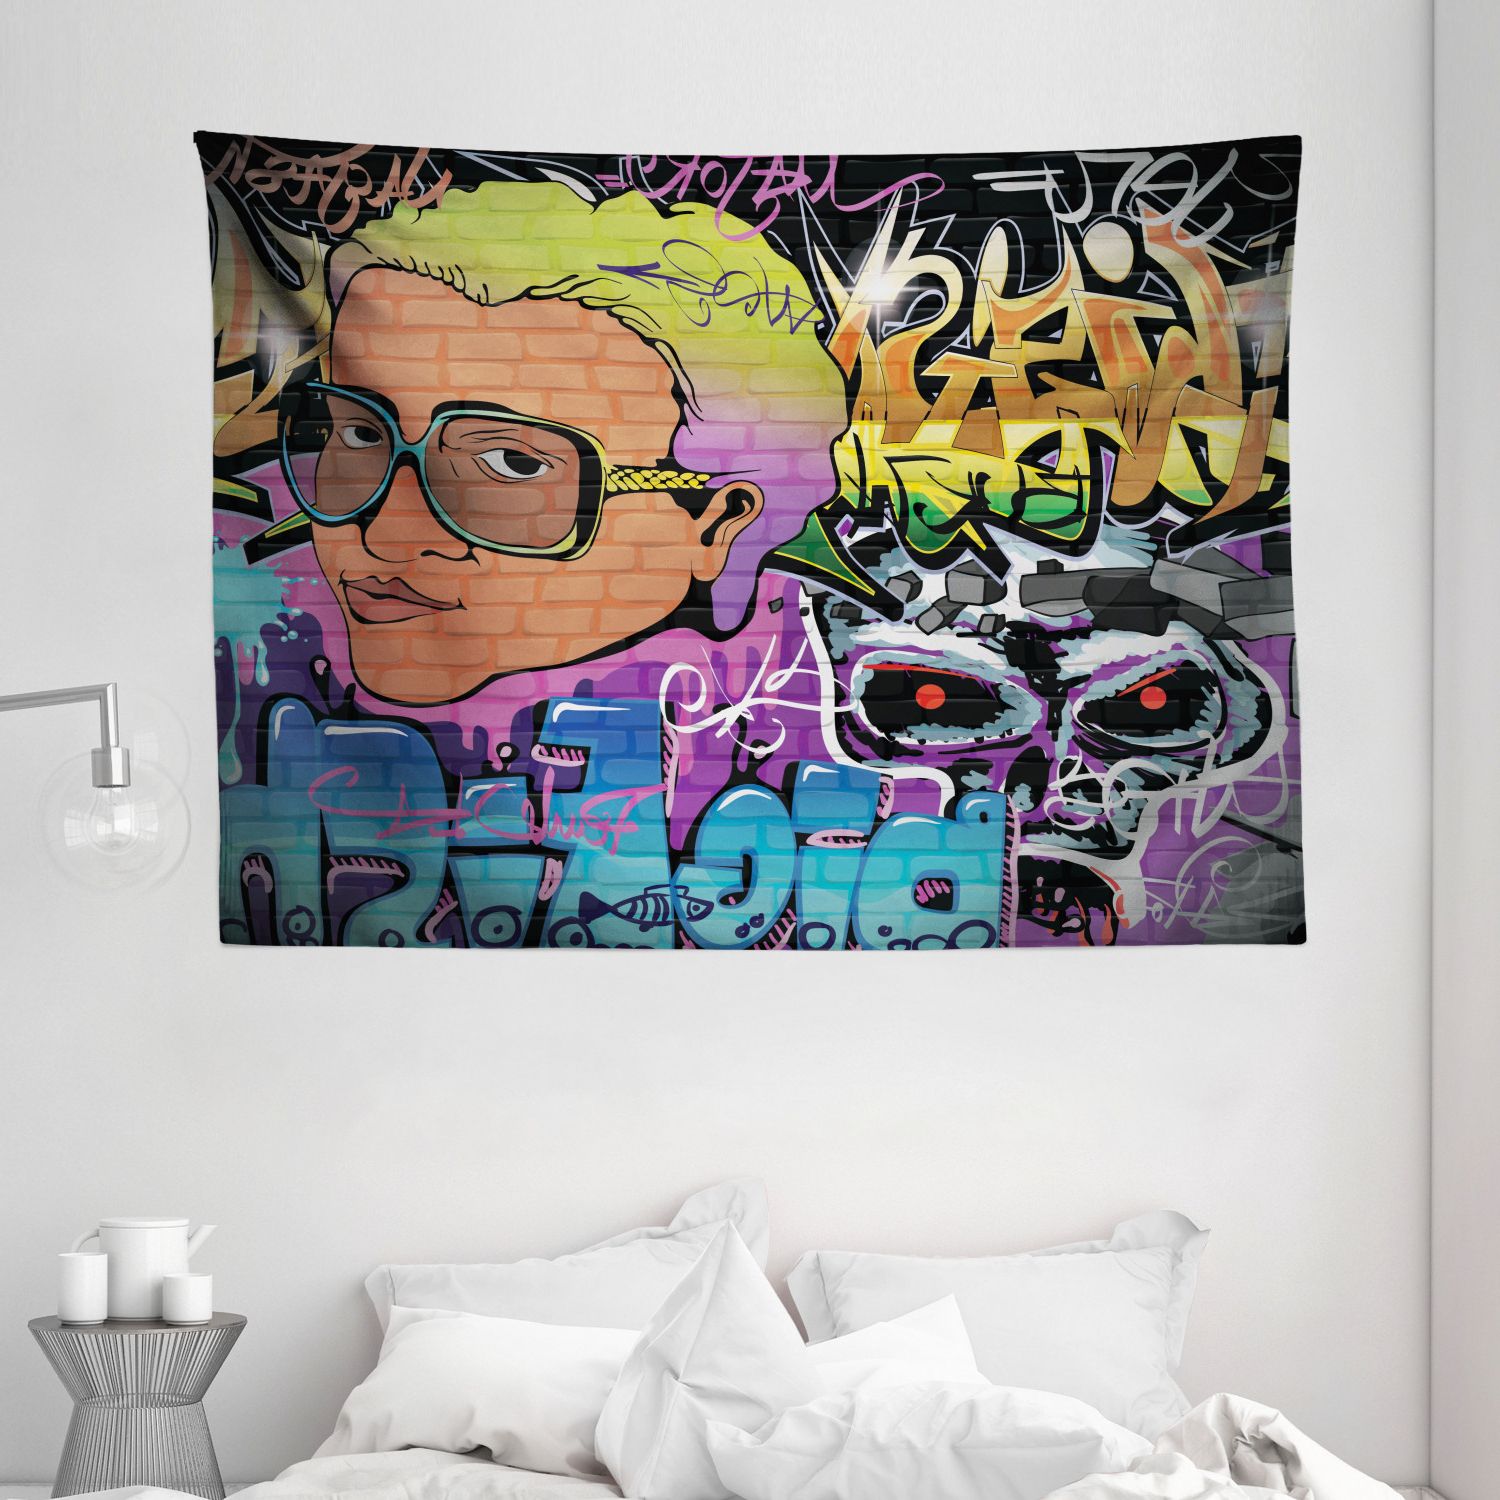 Most Up To Date Urban Graffiti Tapestry, Artistic Hip Hop Design Graffiti Wall Urban Art  Background Man Head Detail, Wall Hanging For Bedroom Living Room Dorm Decor,  80w X 60l Inches, Multicolor,ambesonne – Walmart For Hip Hop Design Wall Art (Photo 15 of 15)